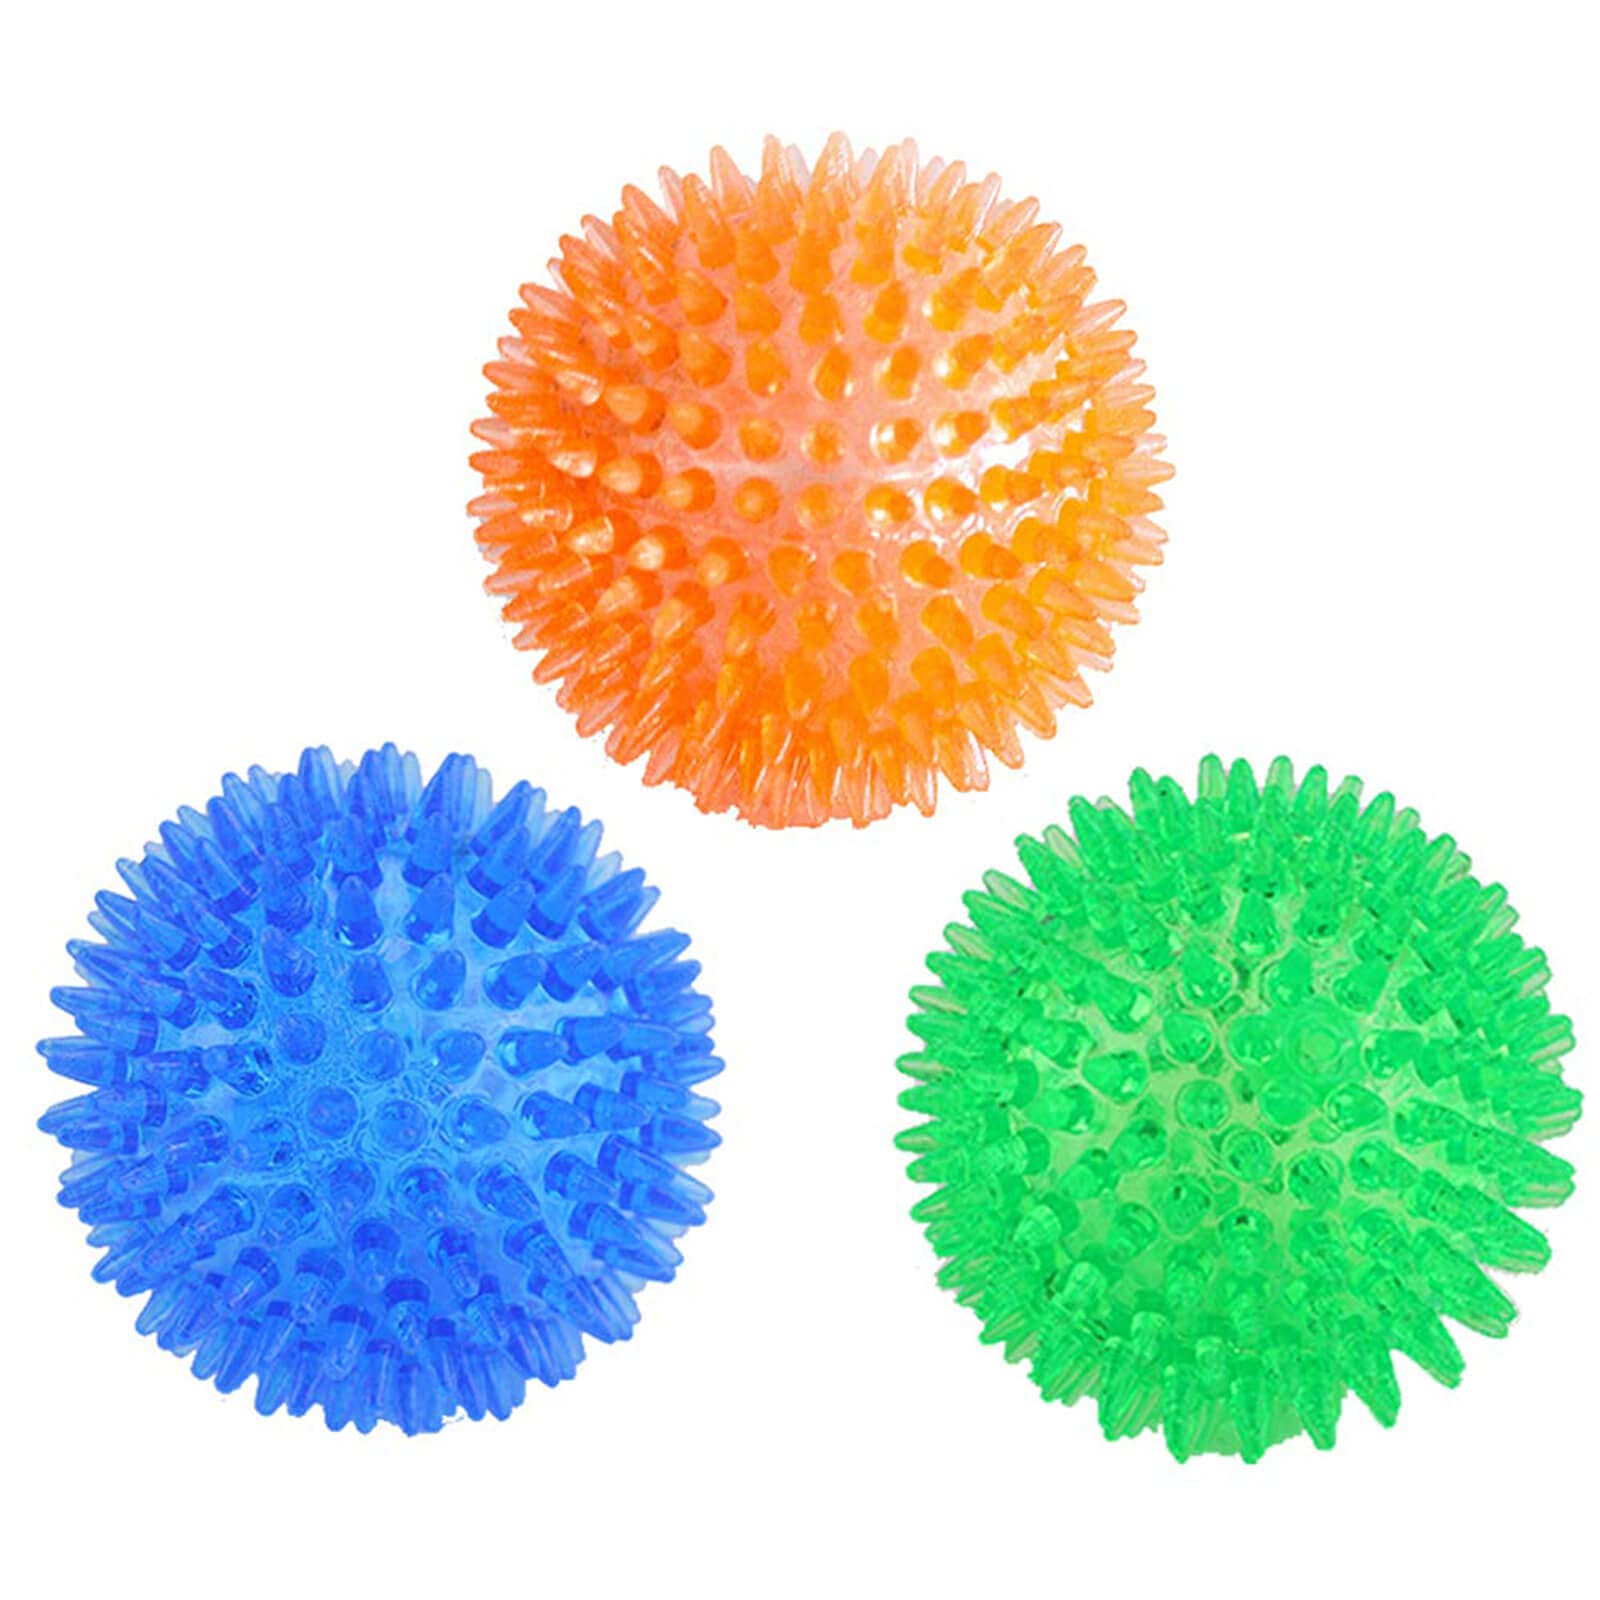 Orgrimmar 3 PCS Pet Squeaky Chewing Balls Dog Soft Stab Balls Cleaning Teeth Toys Balls with High Bounce for Small Medium Large Pet Dog Cat Toys(Medium,3.54in)